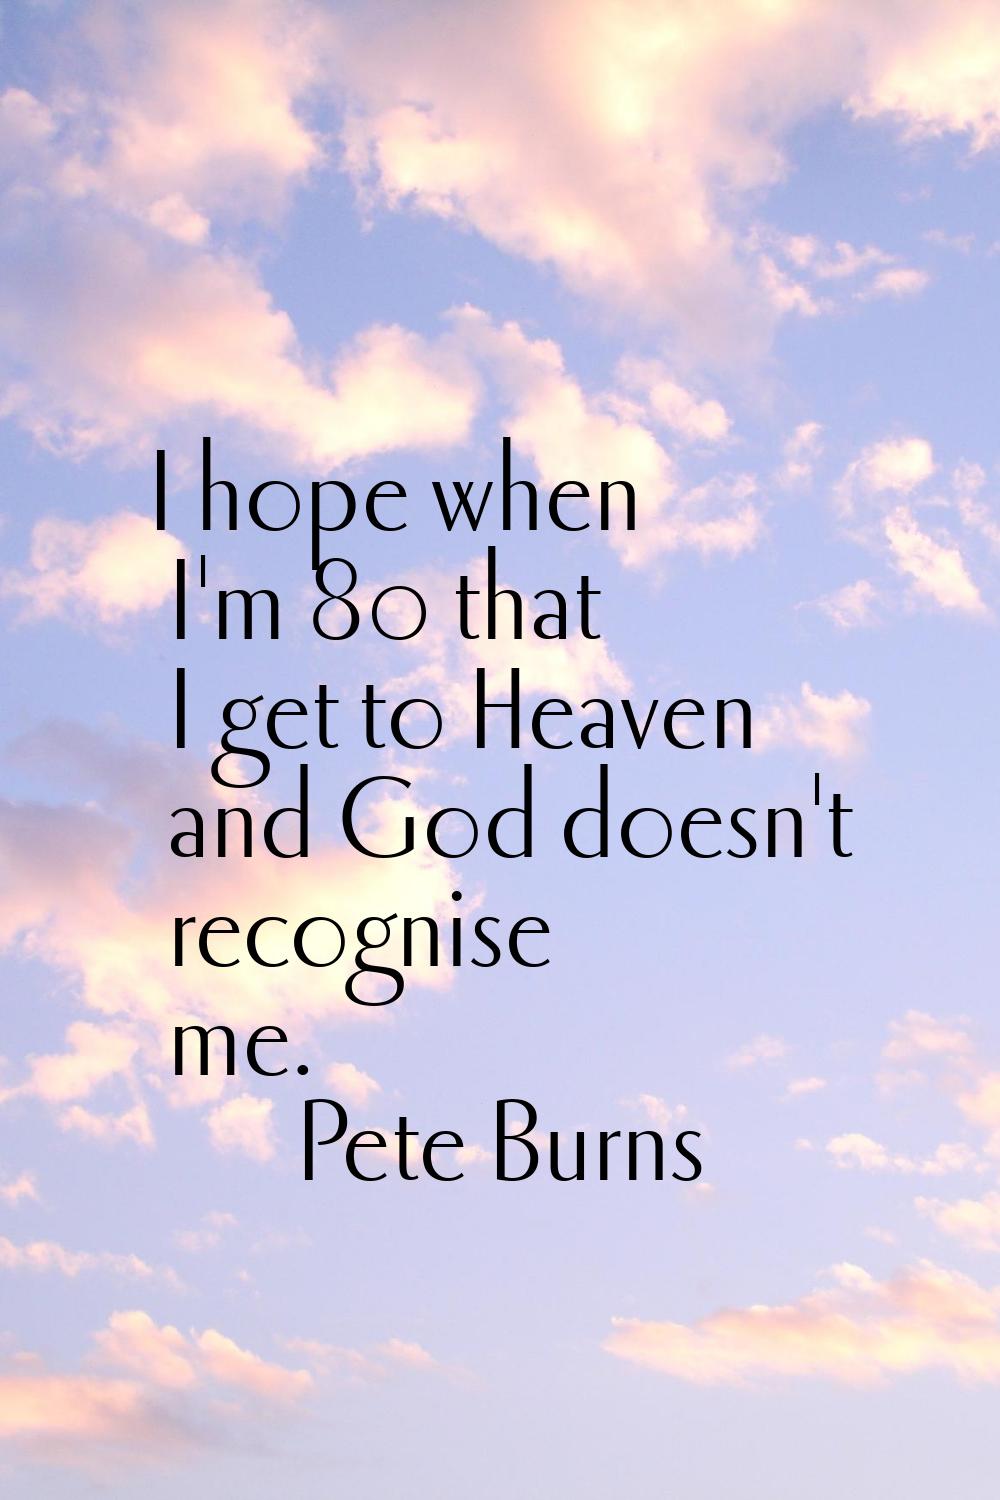 I hope when I'm 80 that I get to Heaven and God doesn't recognise me.